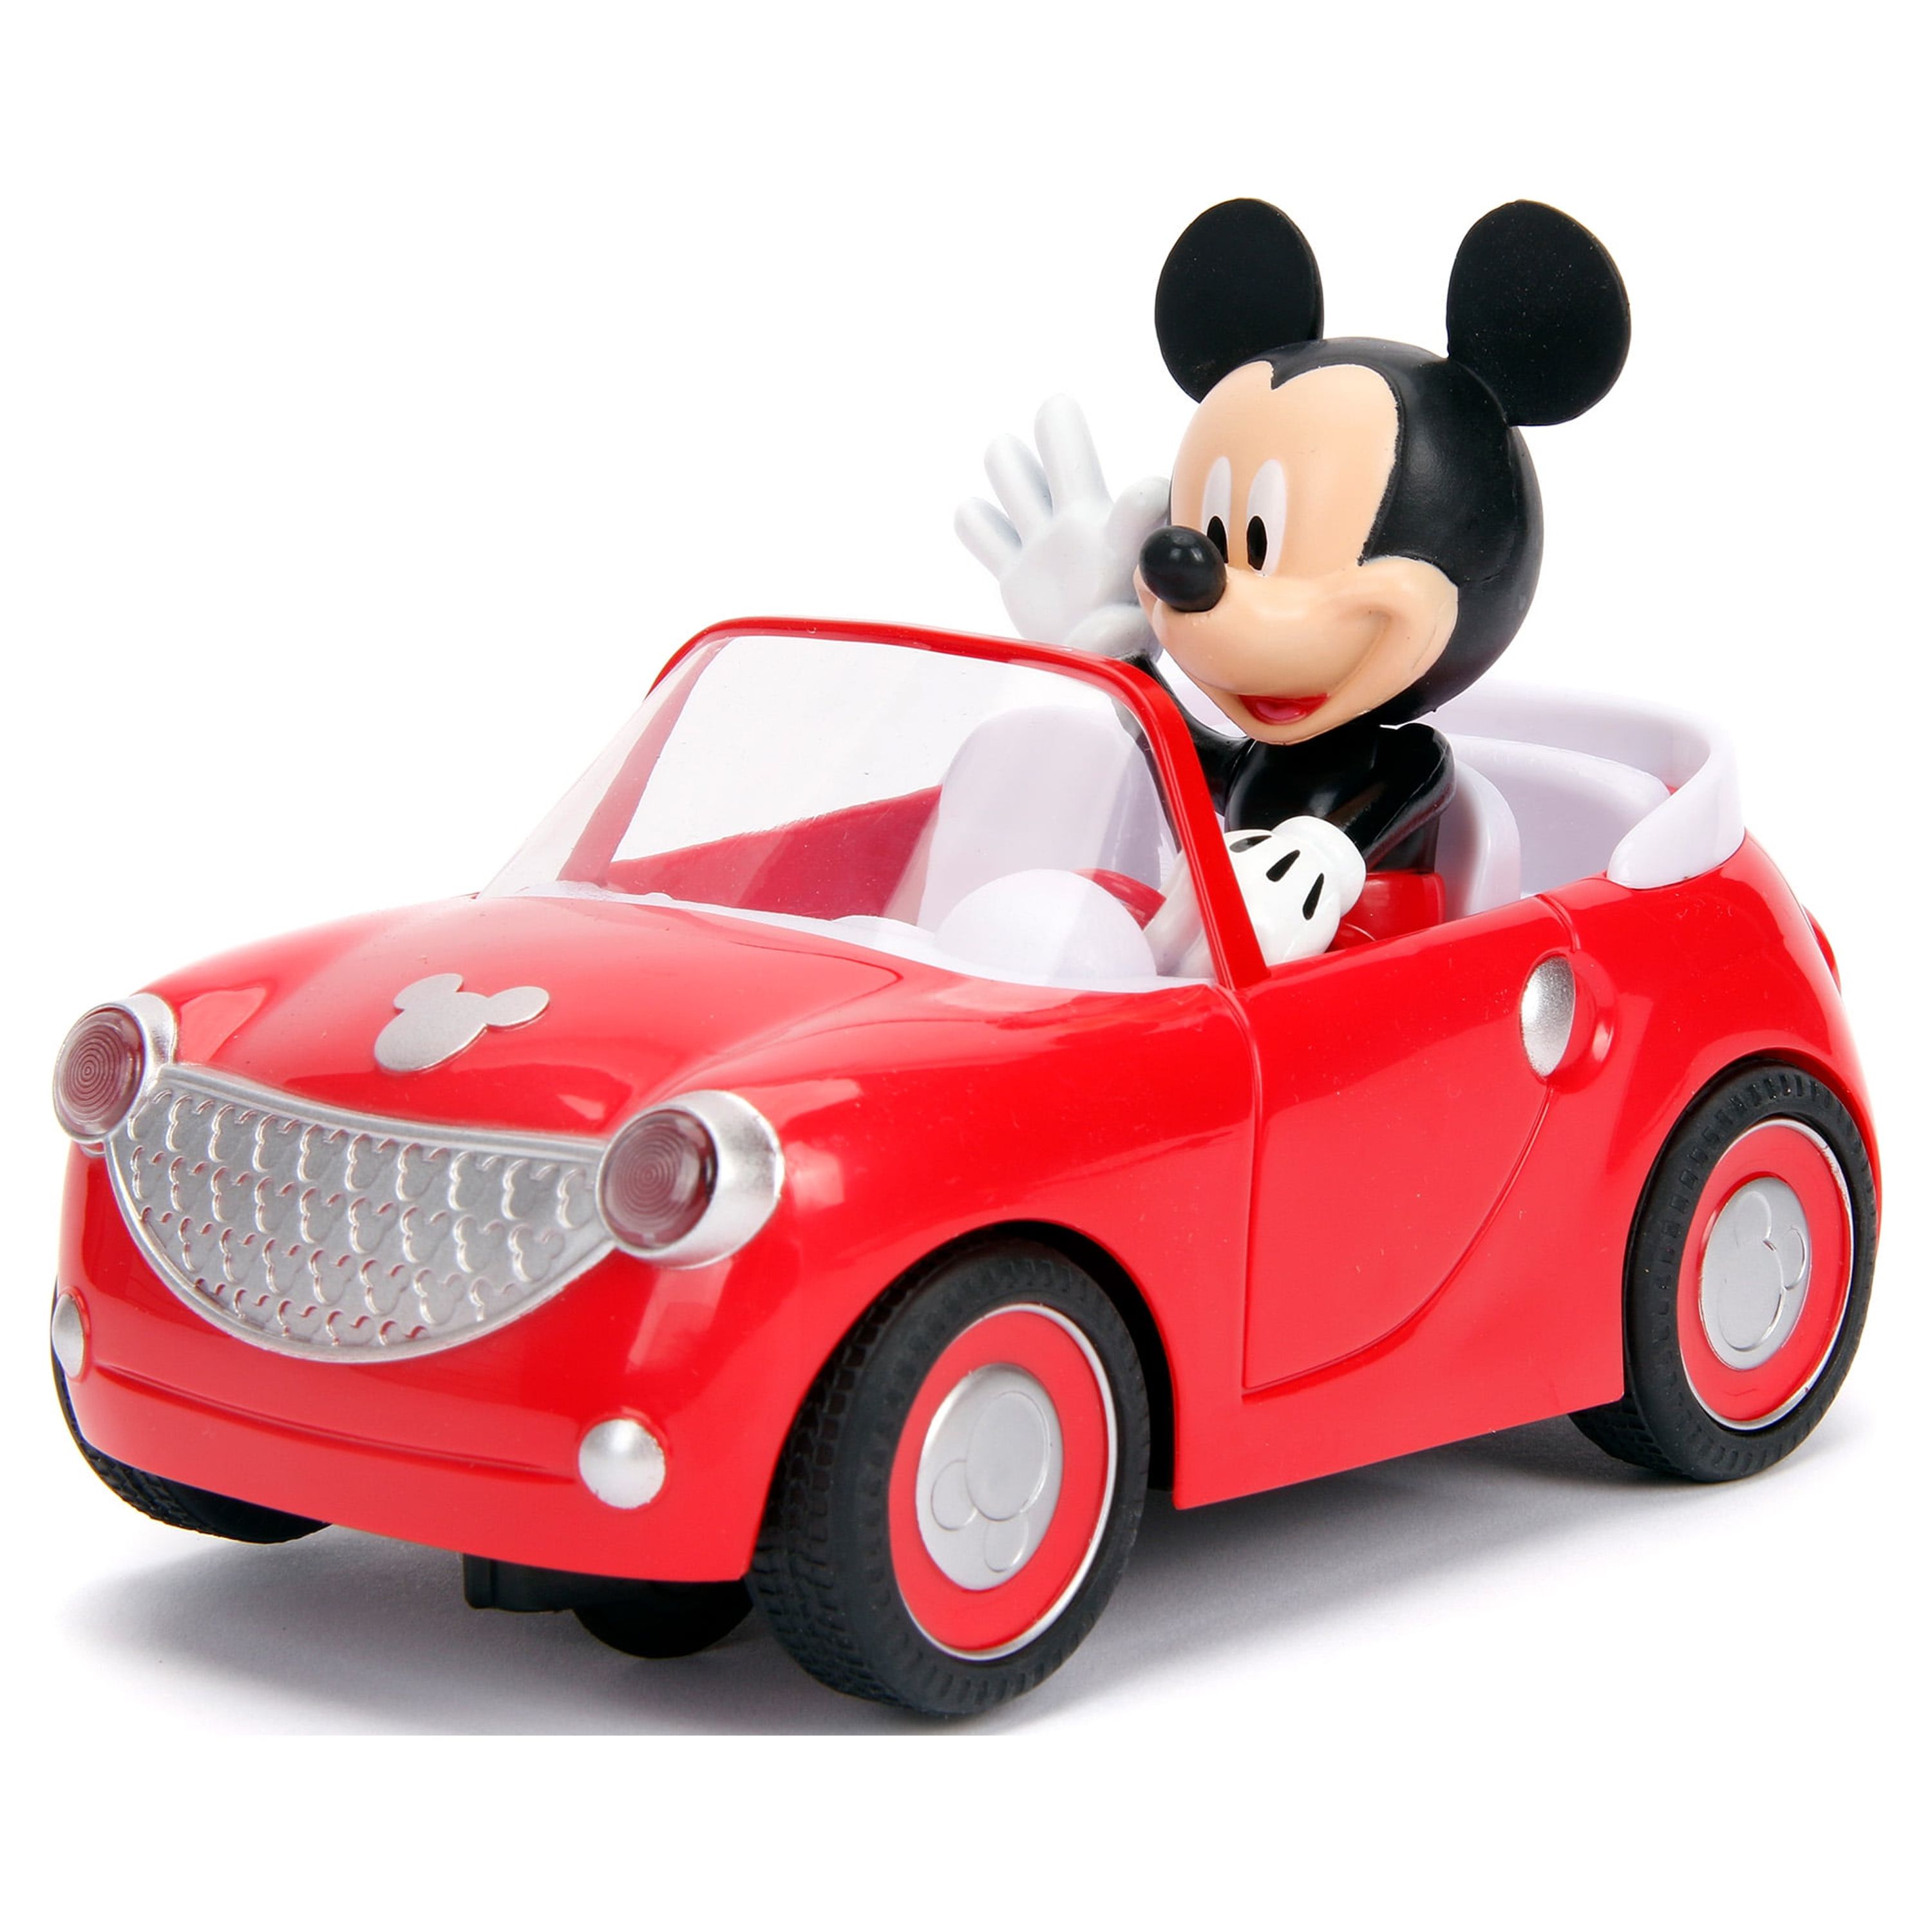 Jada Toys Classic Roadster Mickey Mouse Battery-Powered RC Car(Red) - image 3 of 6